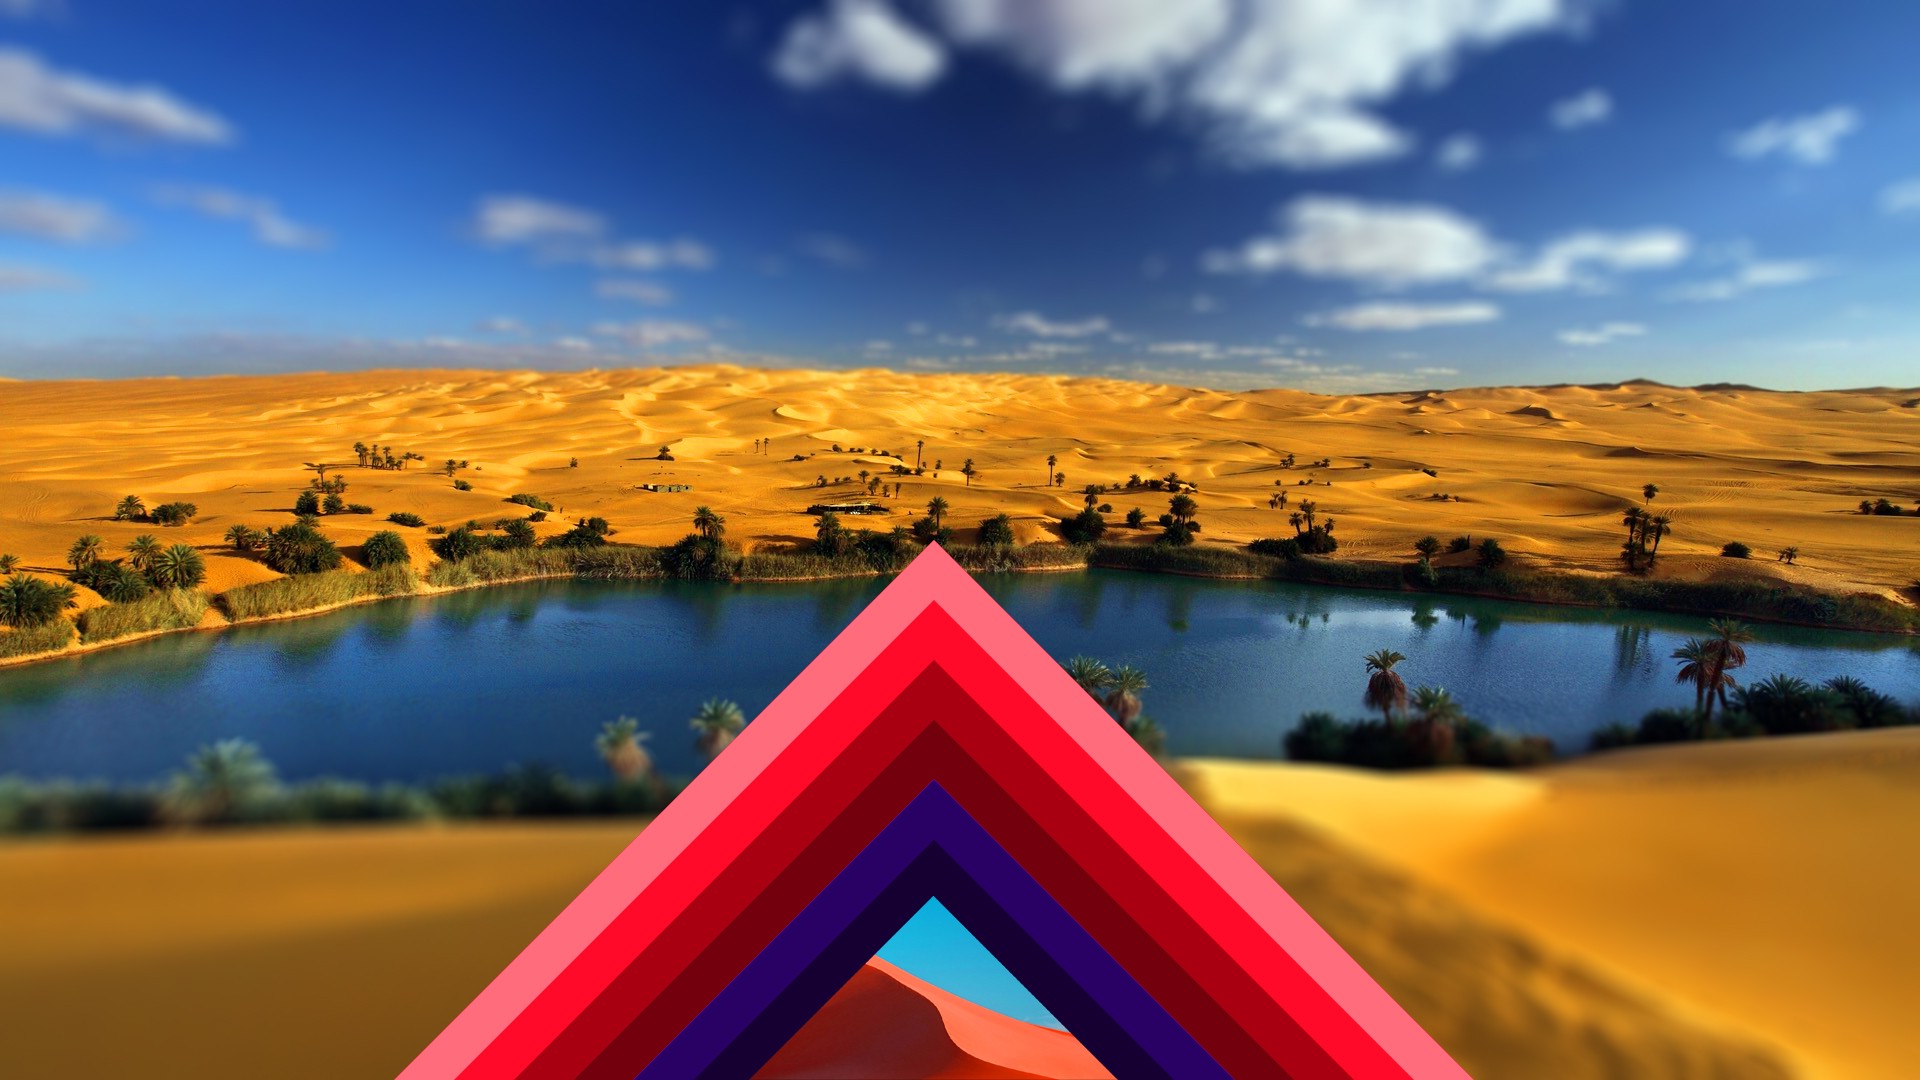 triangle, Abstract, Polyscape, Photo Manipulation, Desert, Landscape, Nature Wallpaper